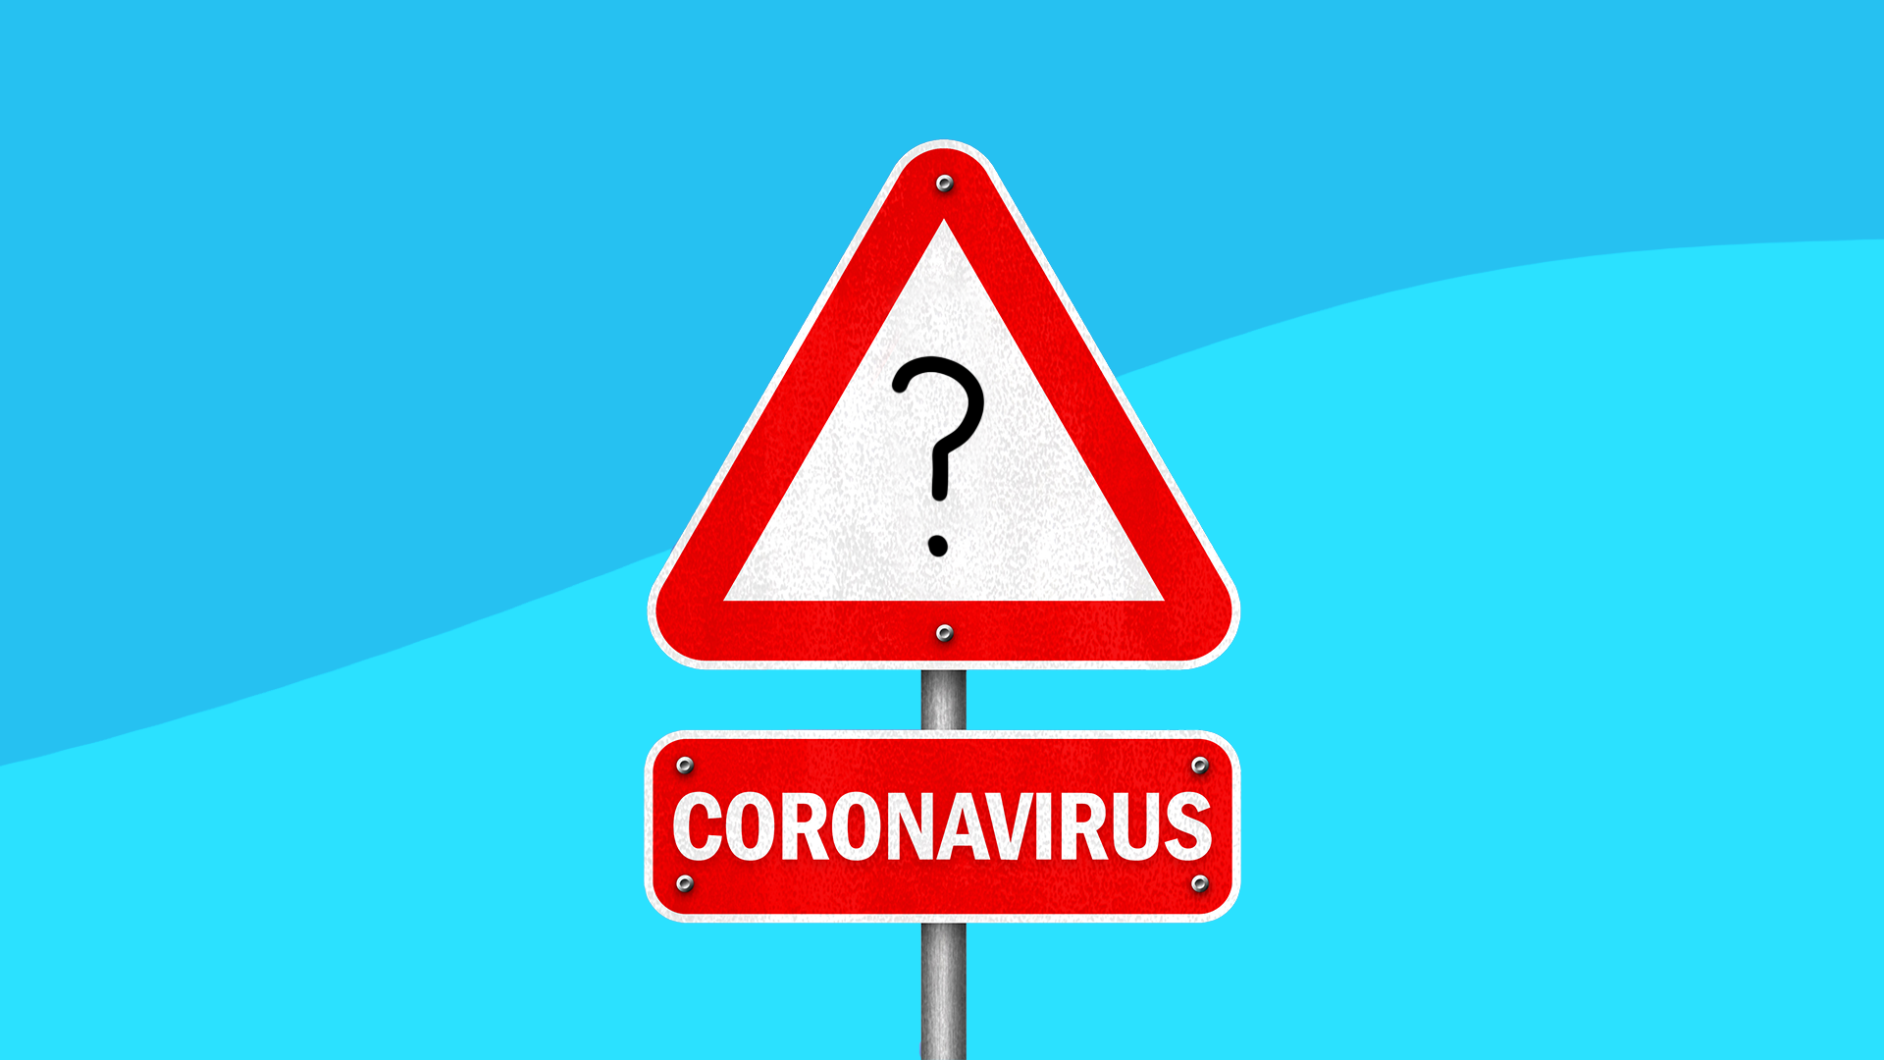 A sign with coronavirus and a question mark represents What to do if you think you have COVID